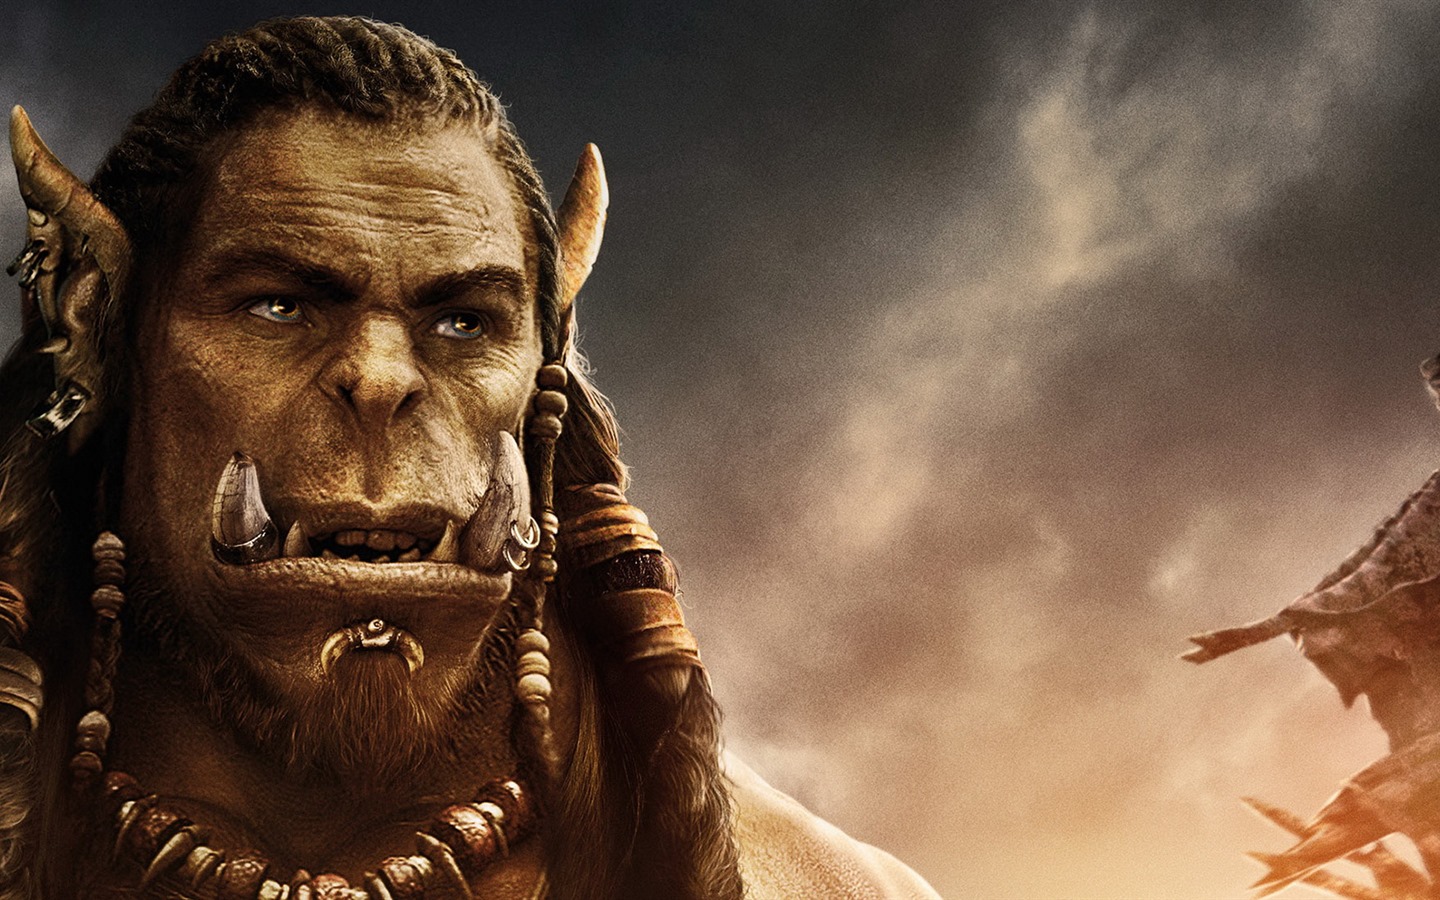 Warcraft, 2016 movie HD wallpapers #13 - 1440x900